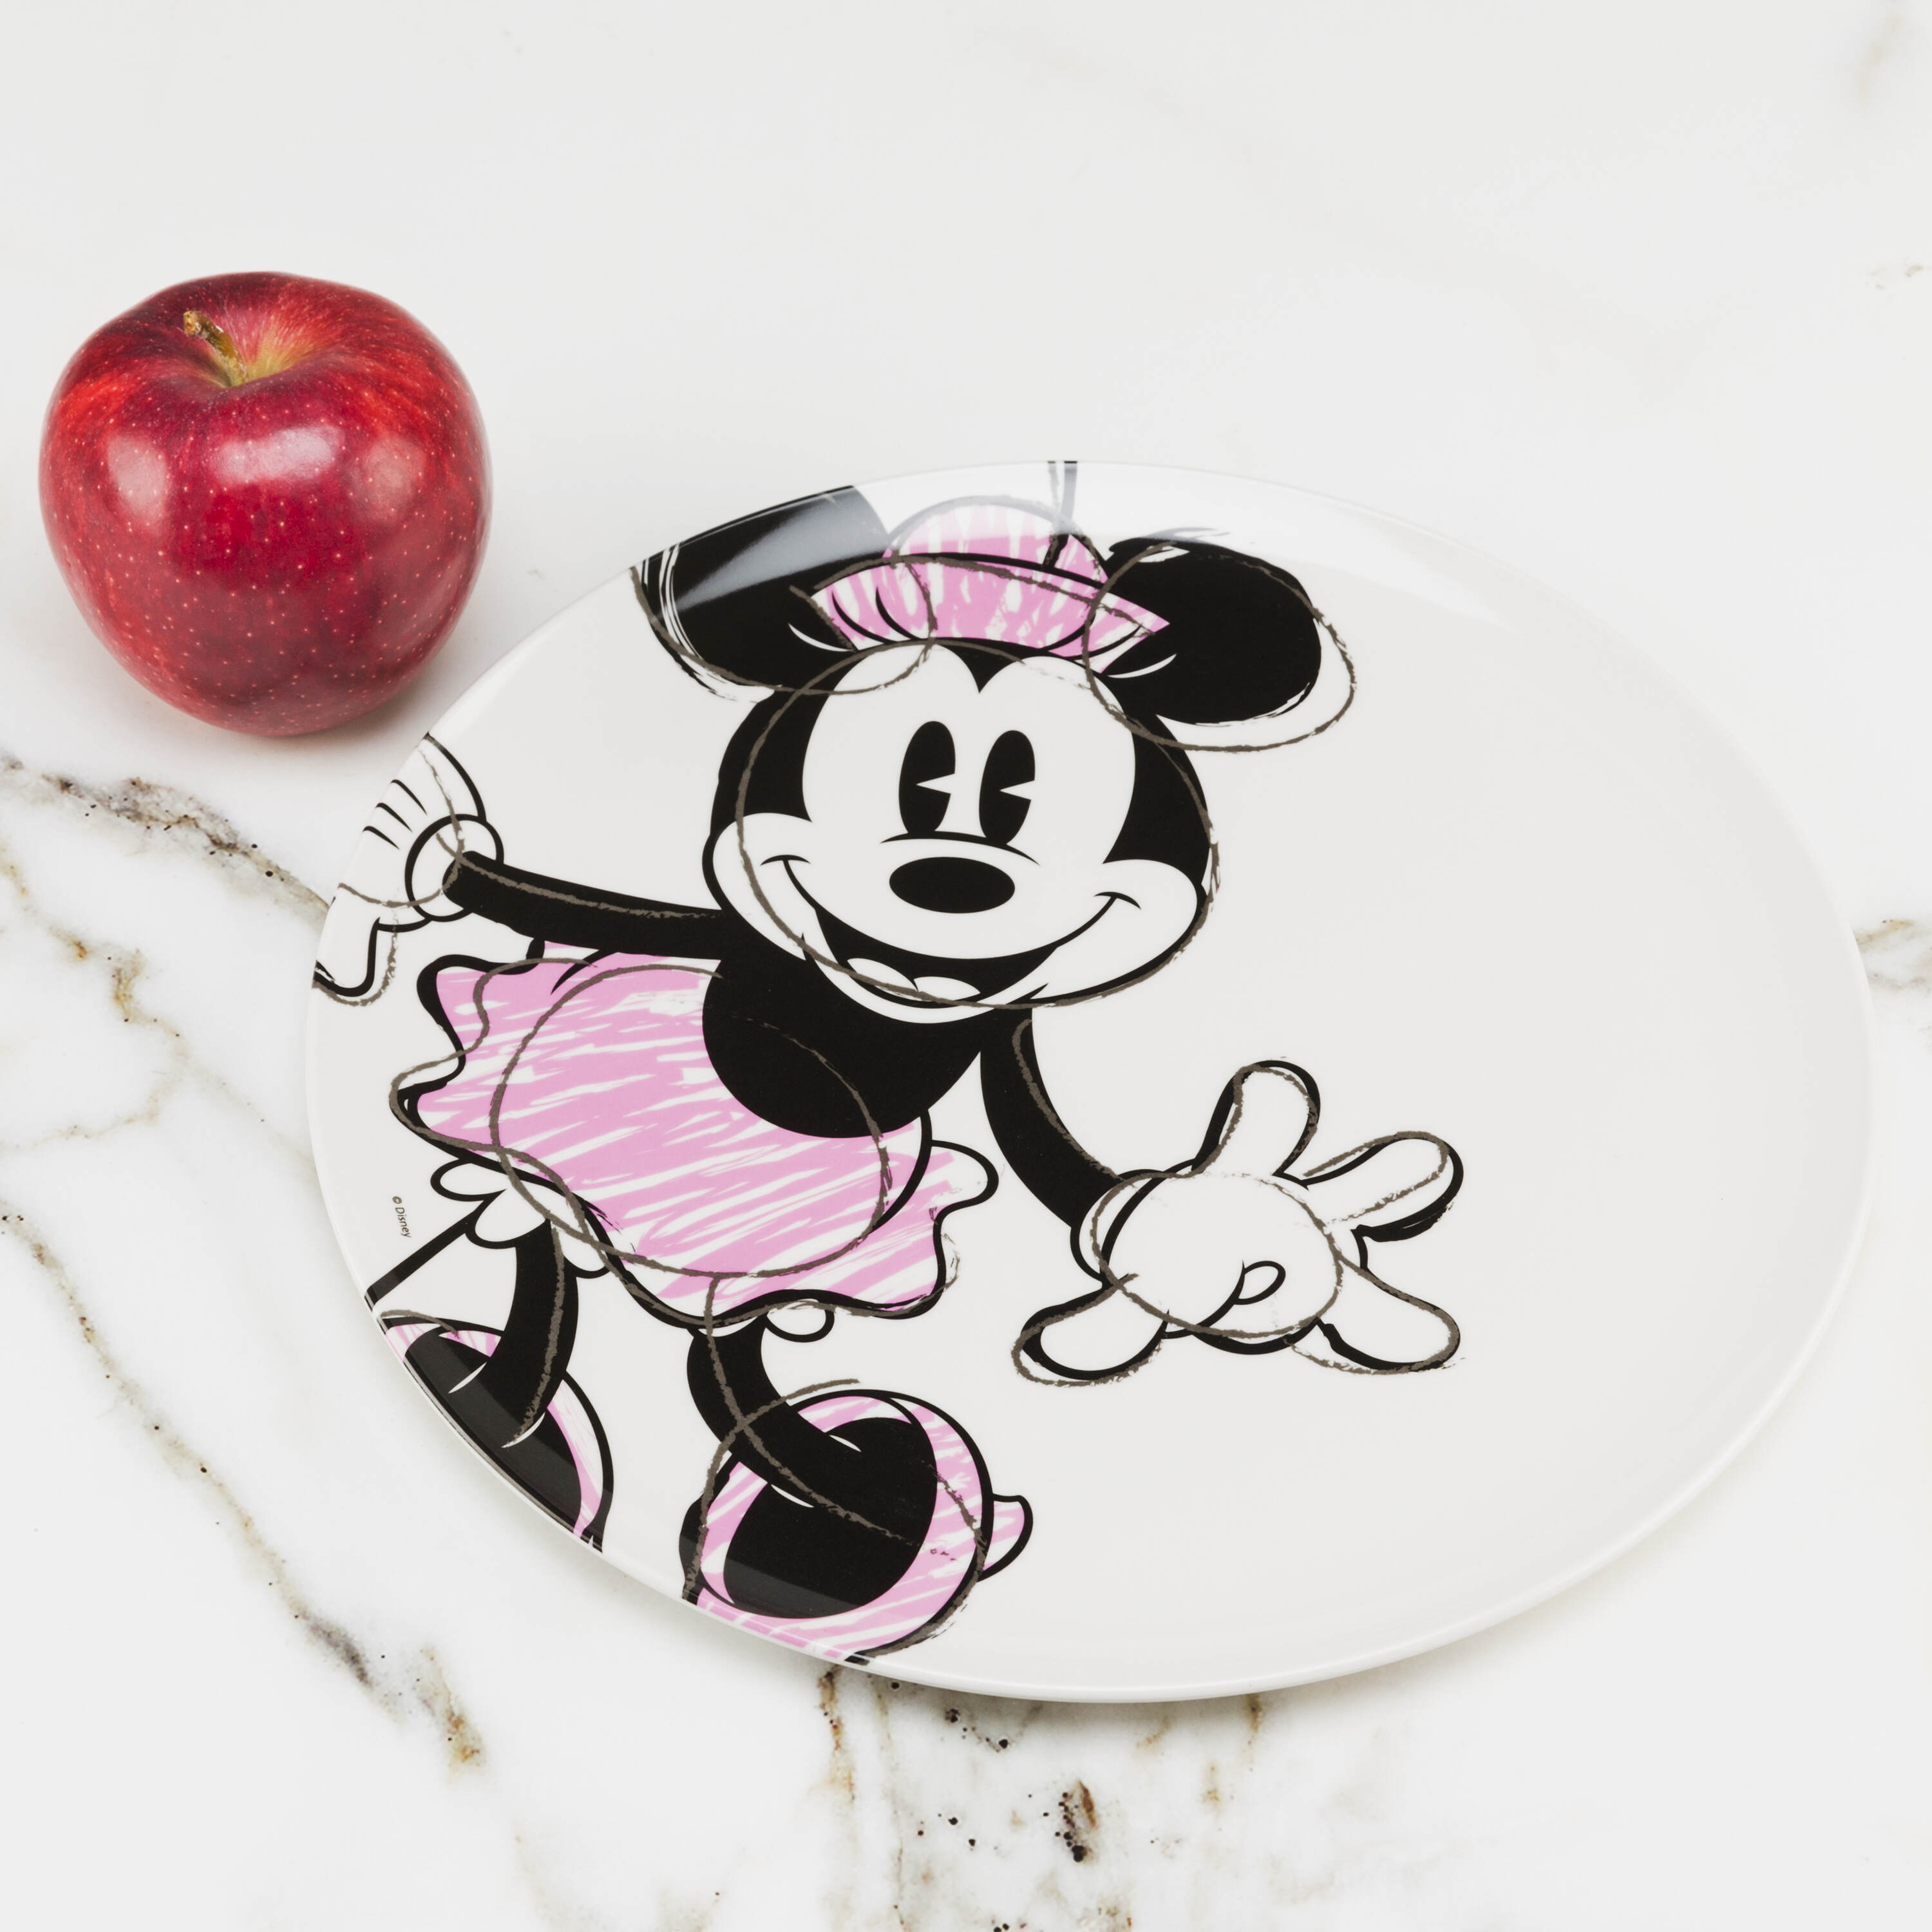 Children’s Mickey & Minnie Mouse bowl & plate Plastic Microwave Safe BNWT 